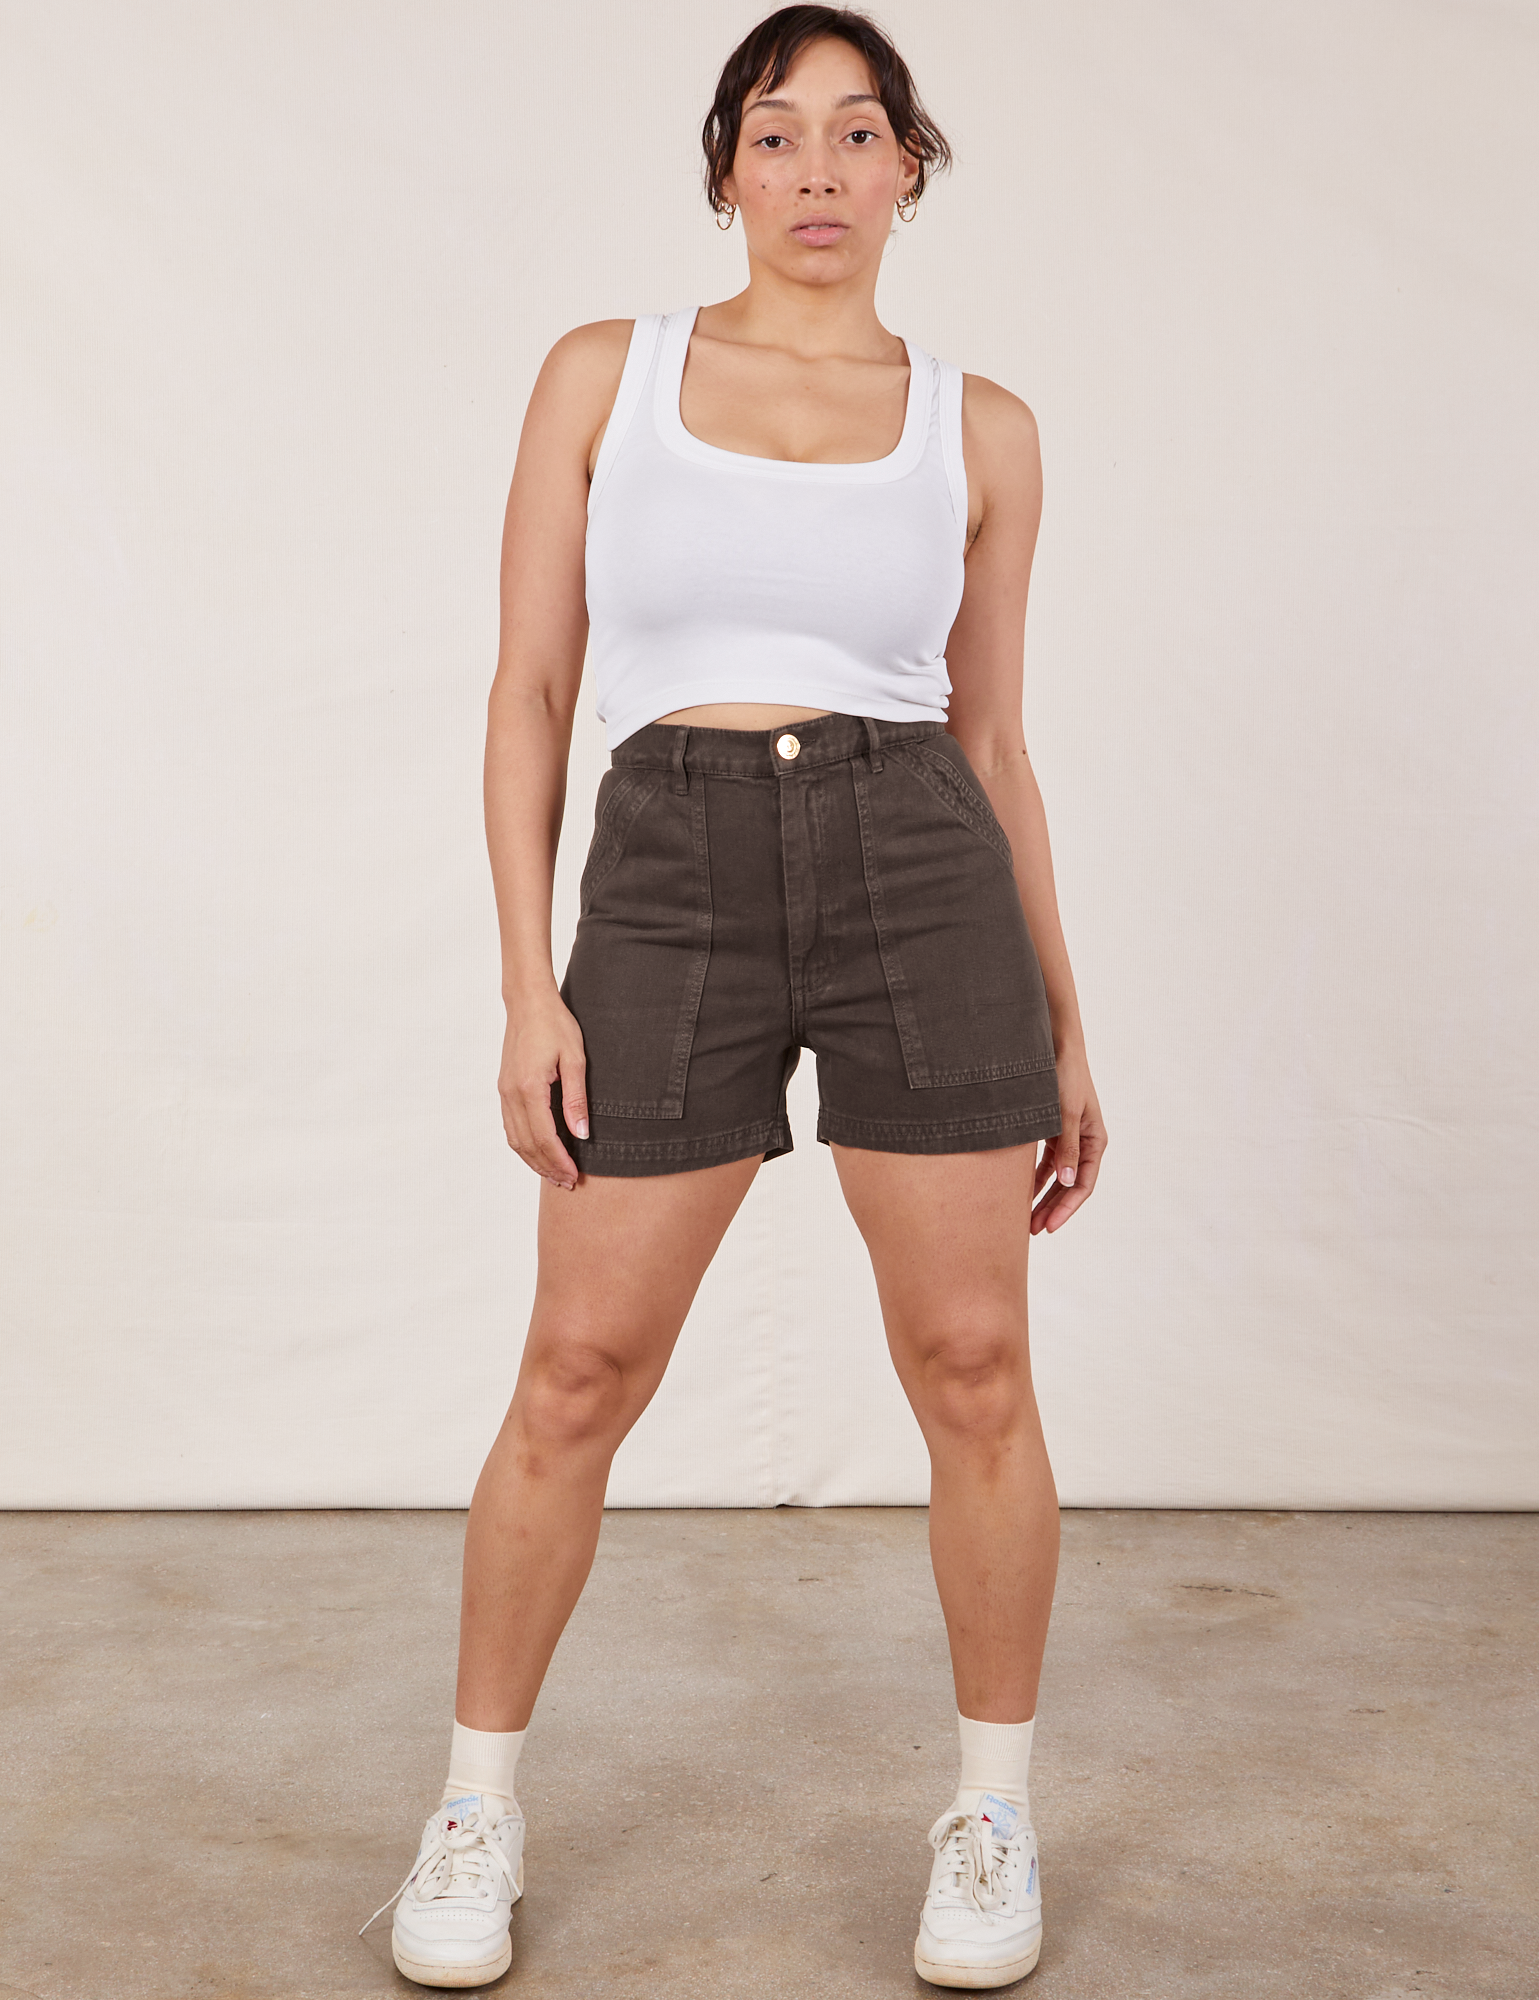 Tiara is wearing Classic Work Shorts in Espresso Brown and Cropped Tank Top in vintage tee off-white